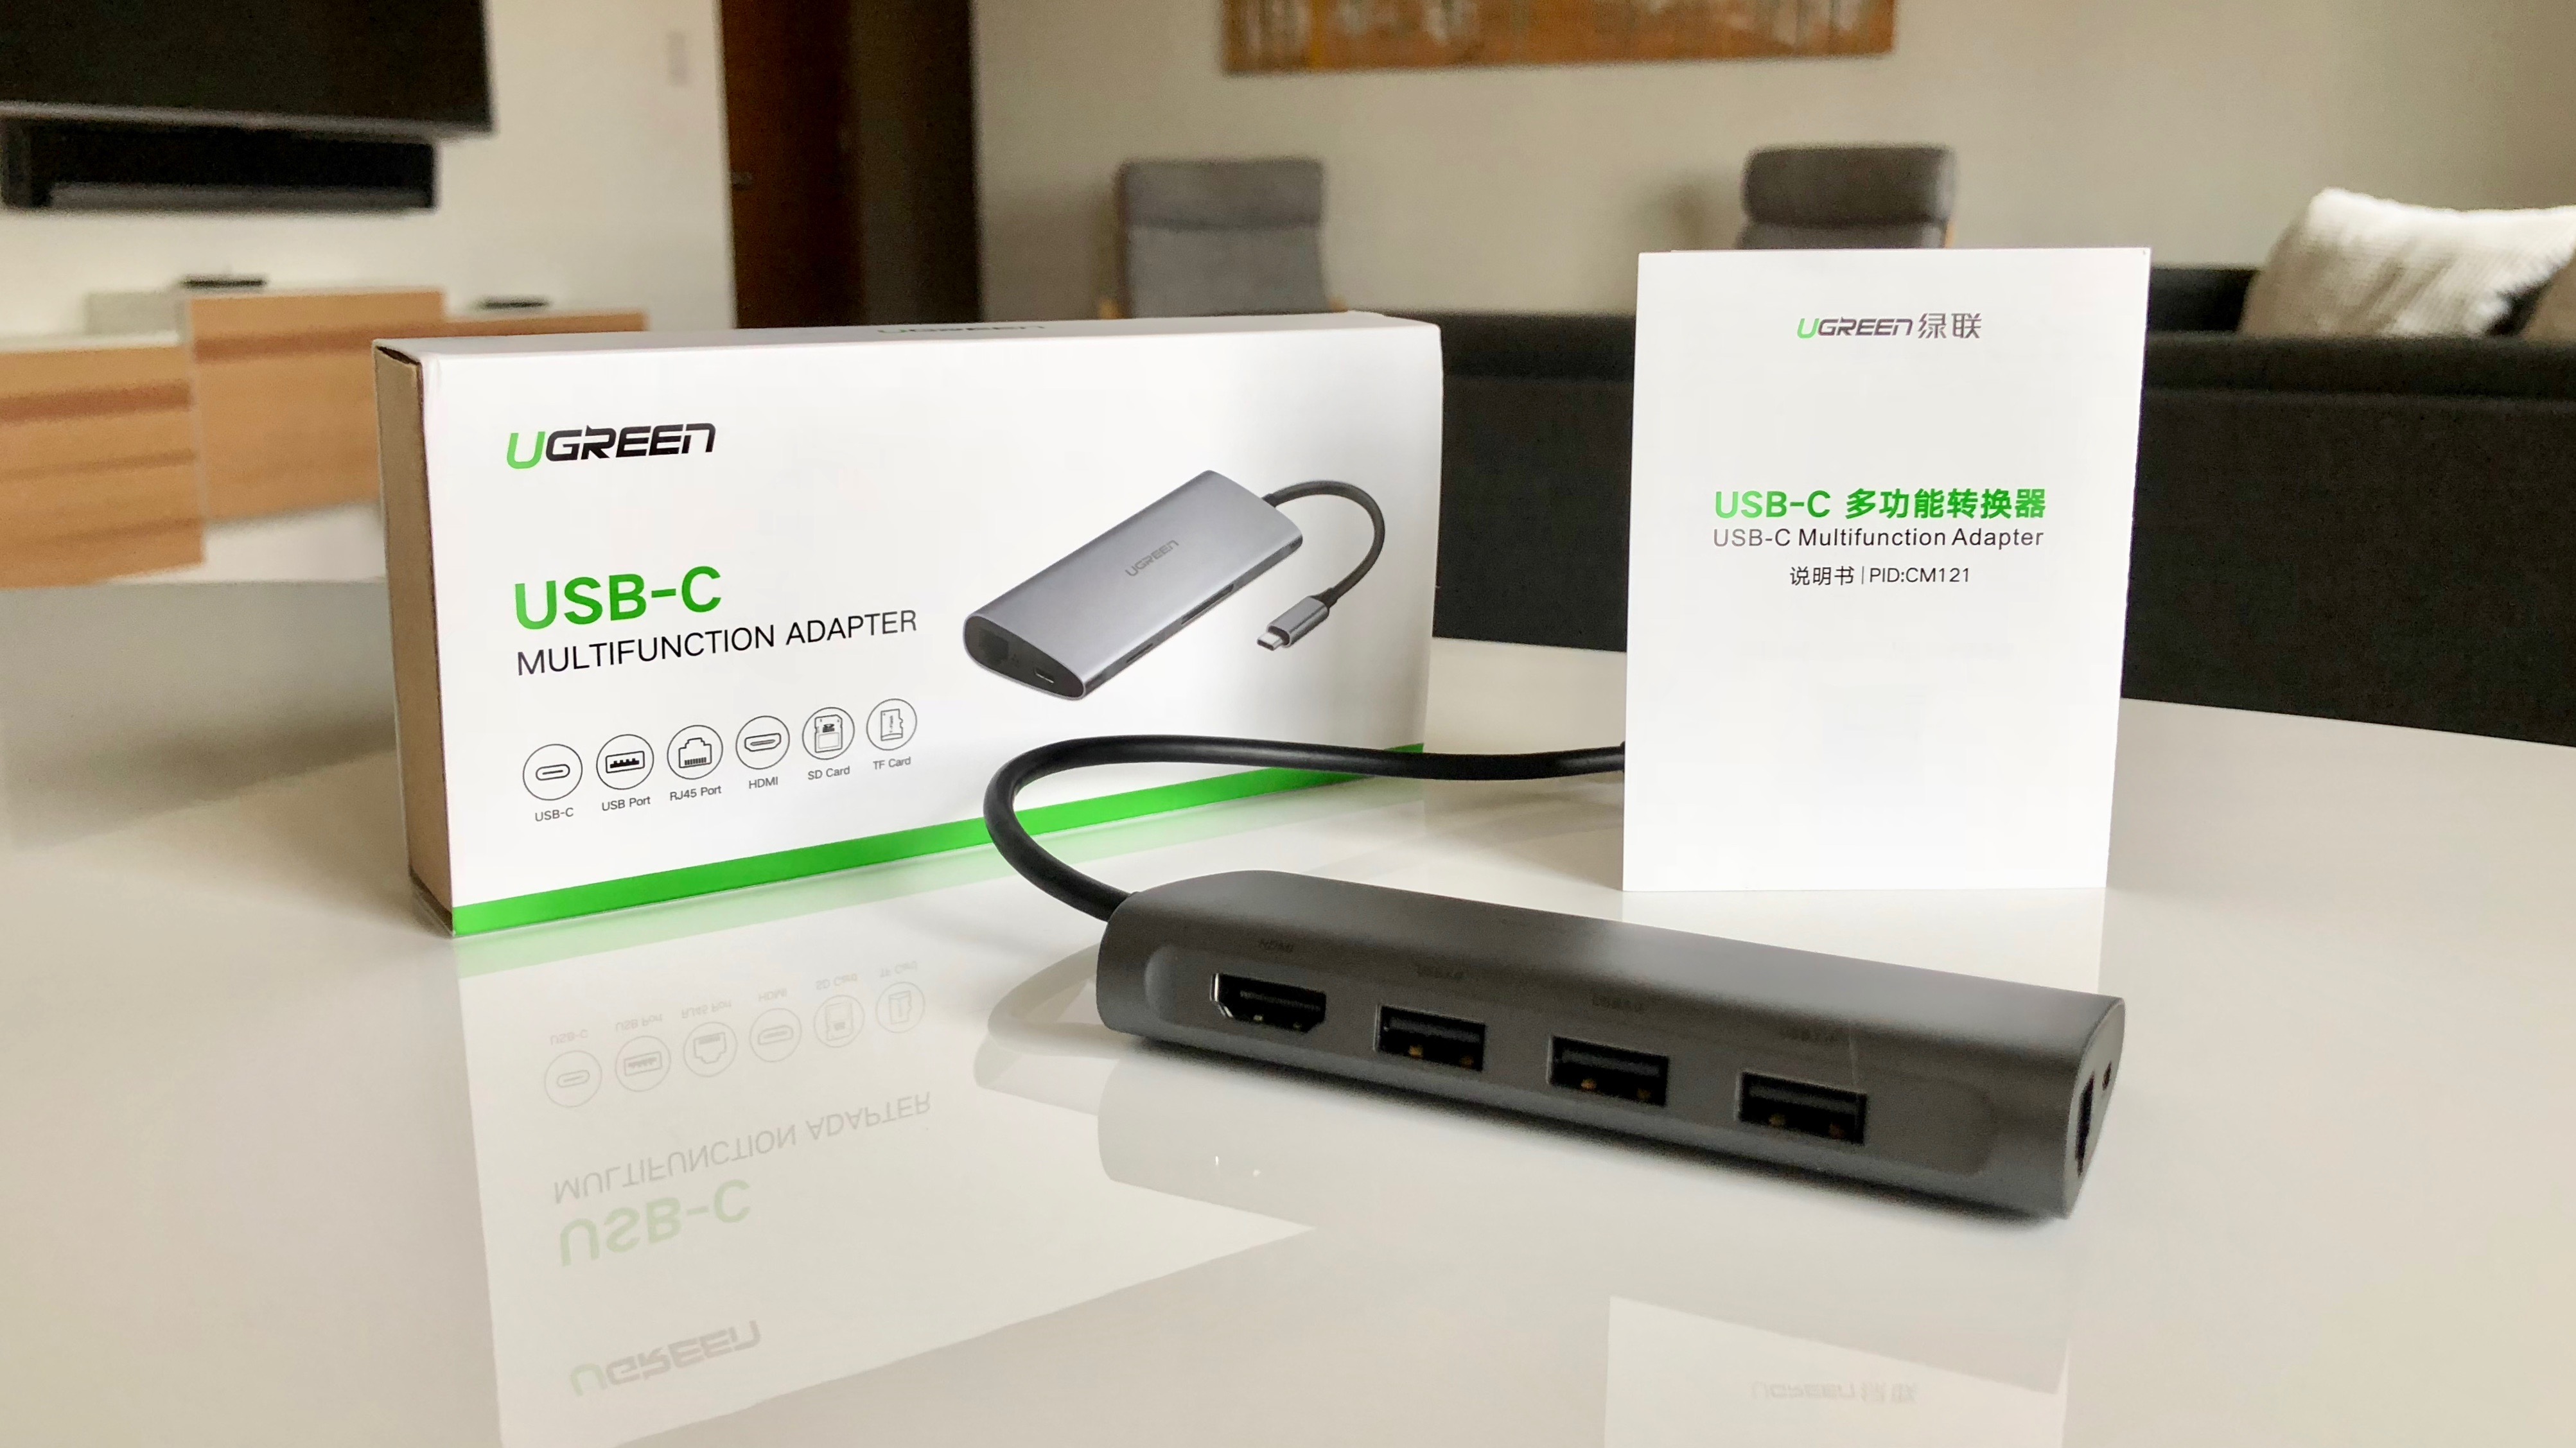 https://9to5mac.com/wp-content/uploads/sites/6/2018/04/ugreen-usb-c-multiport-adapter-lead.jpg?quality=82&strip=all